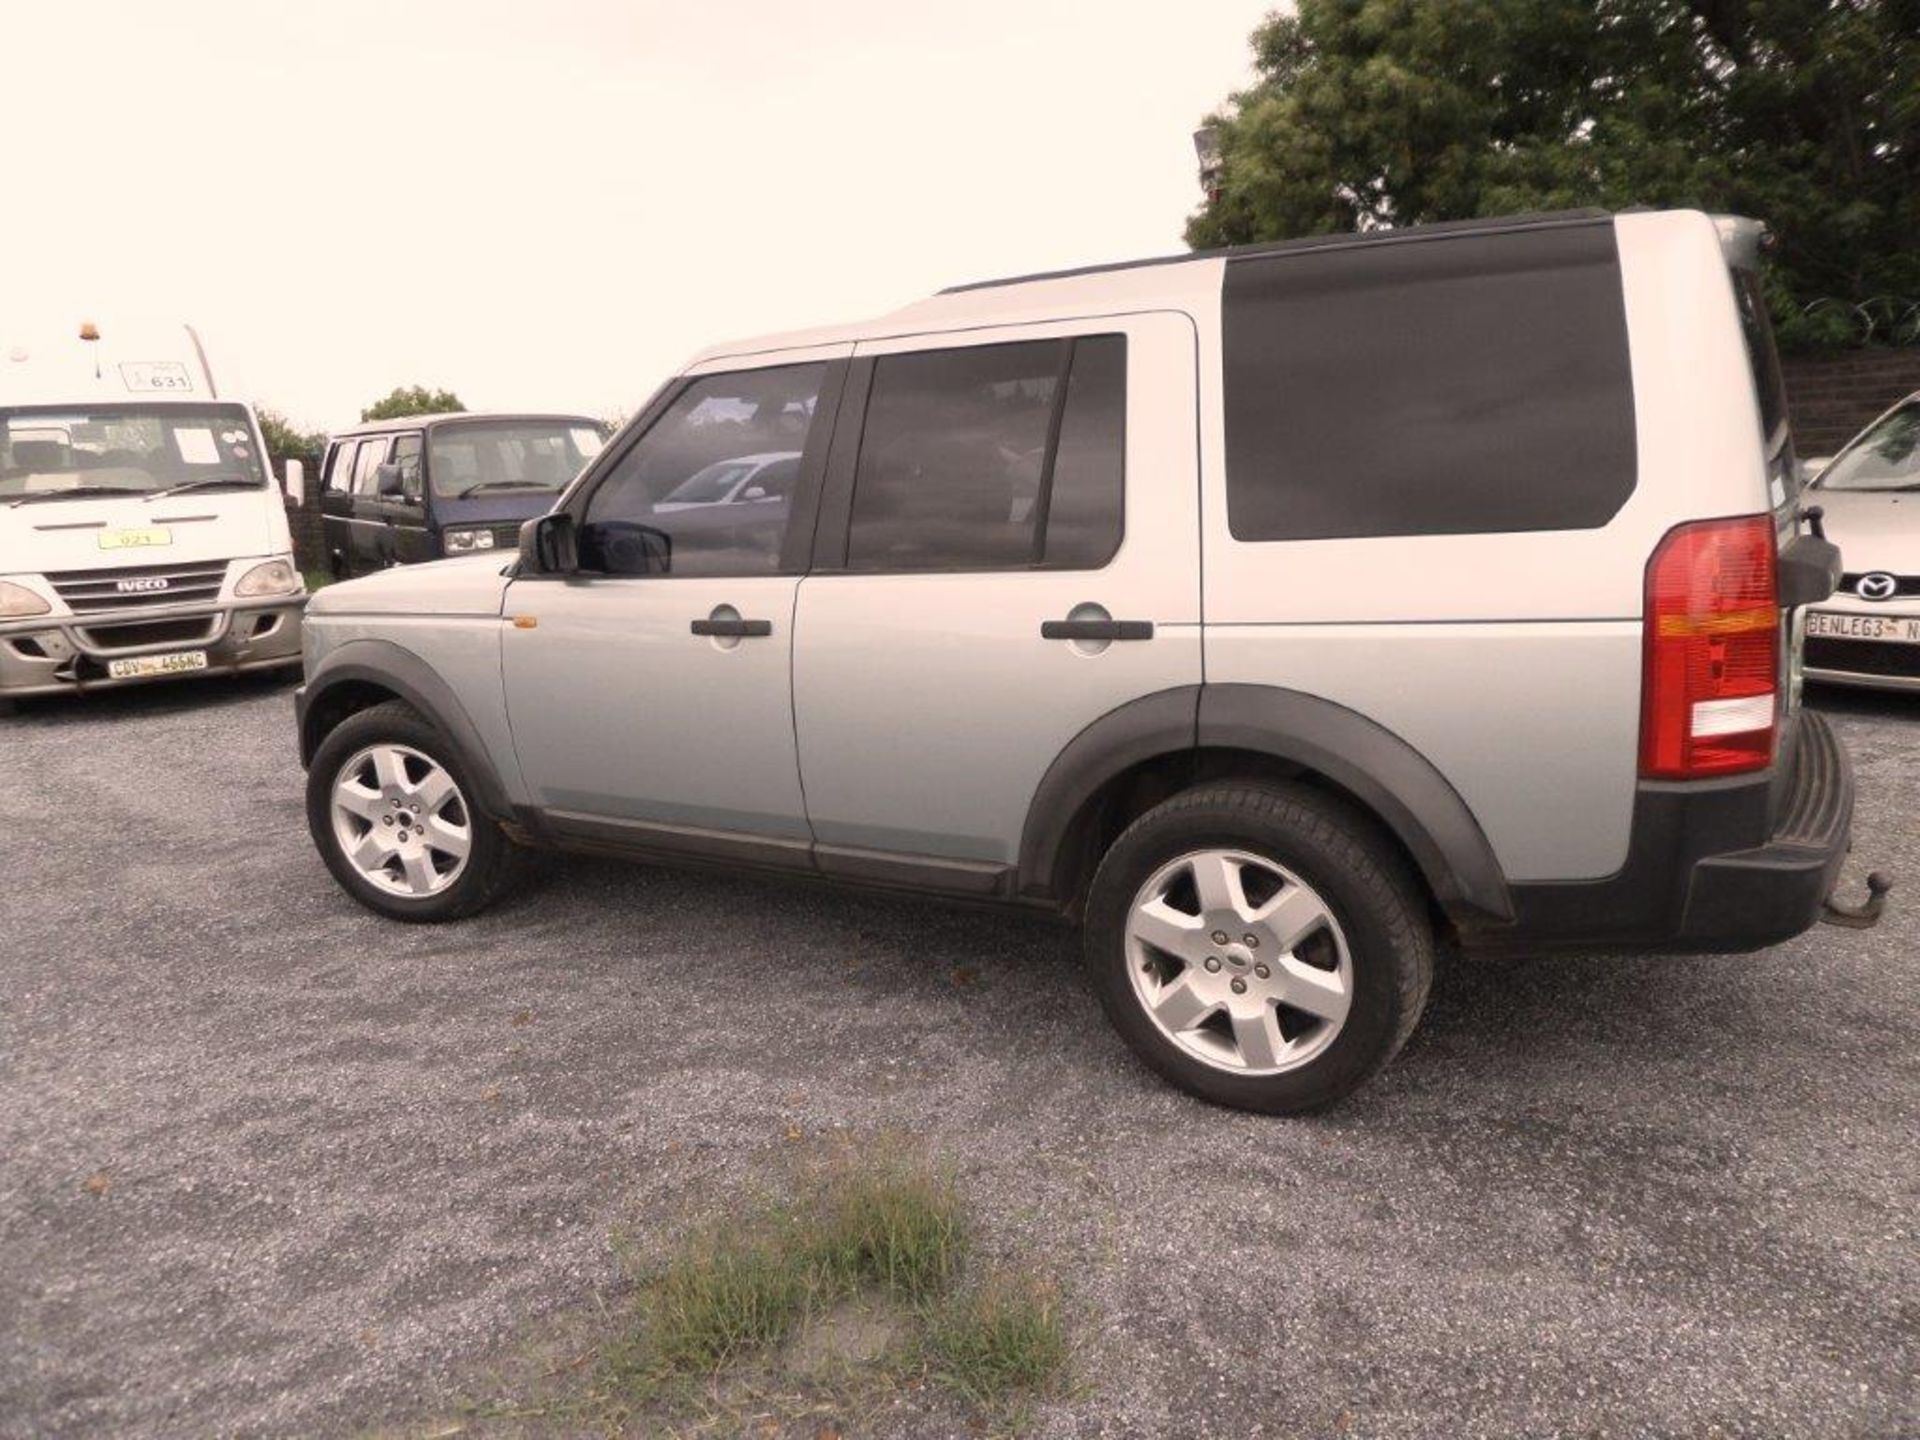 2006 Landrover Discovery 3 (Type LA) - Image 5 of 10